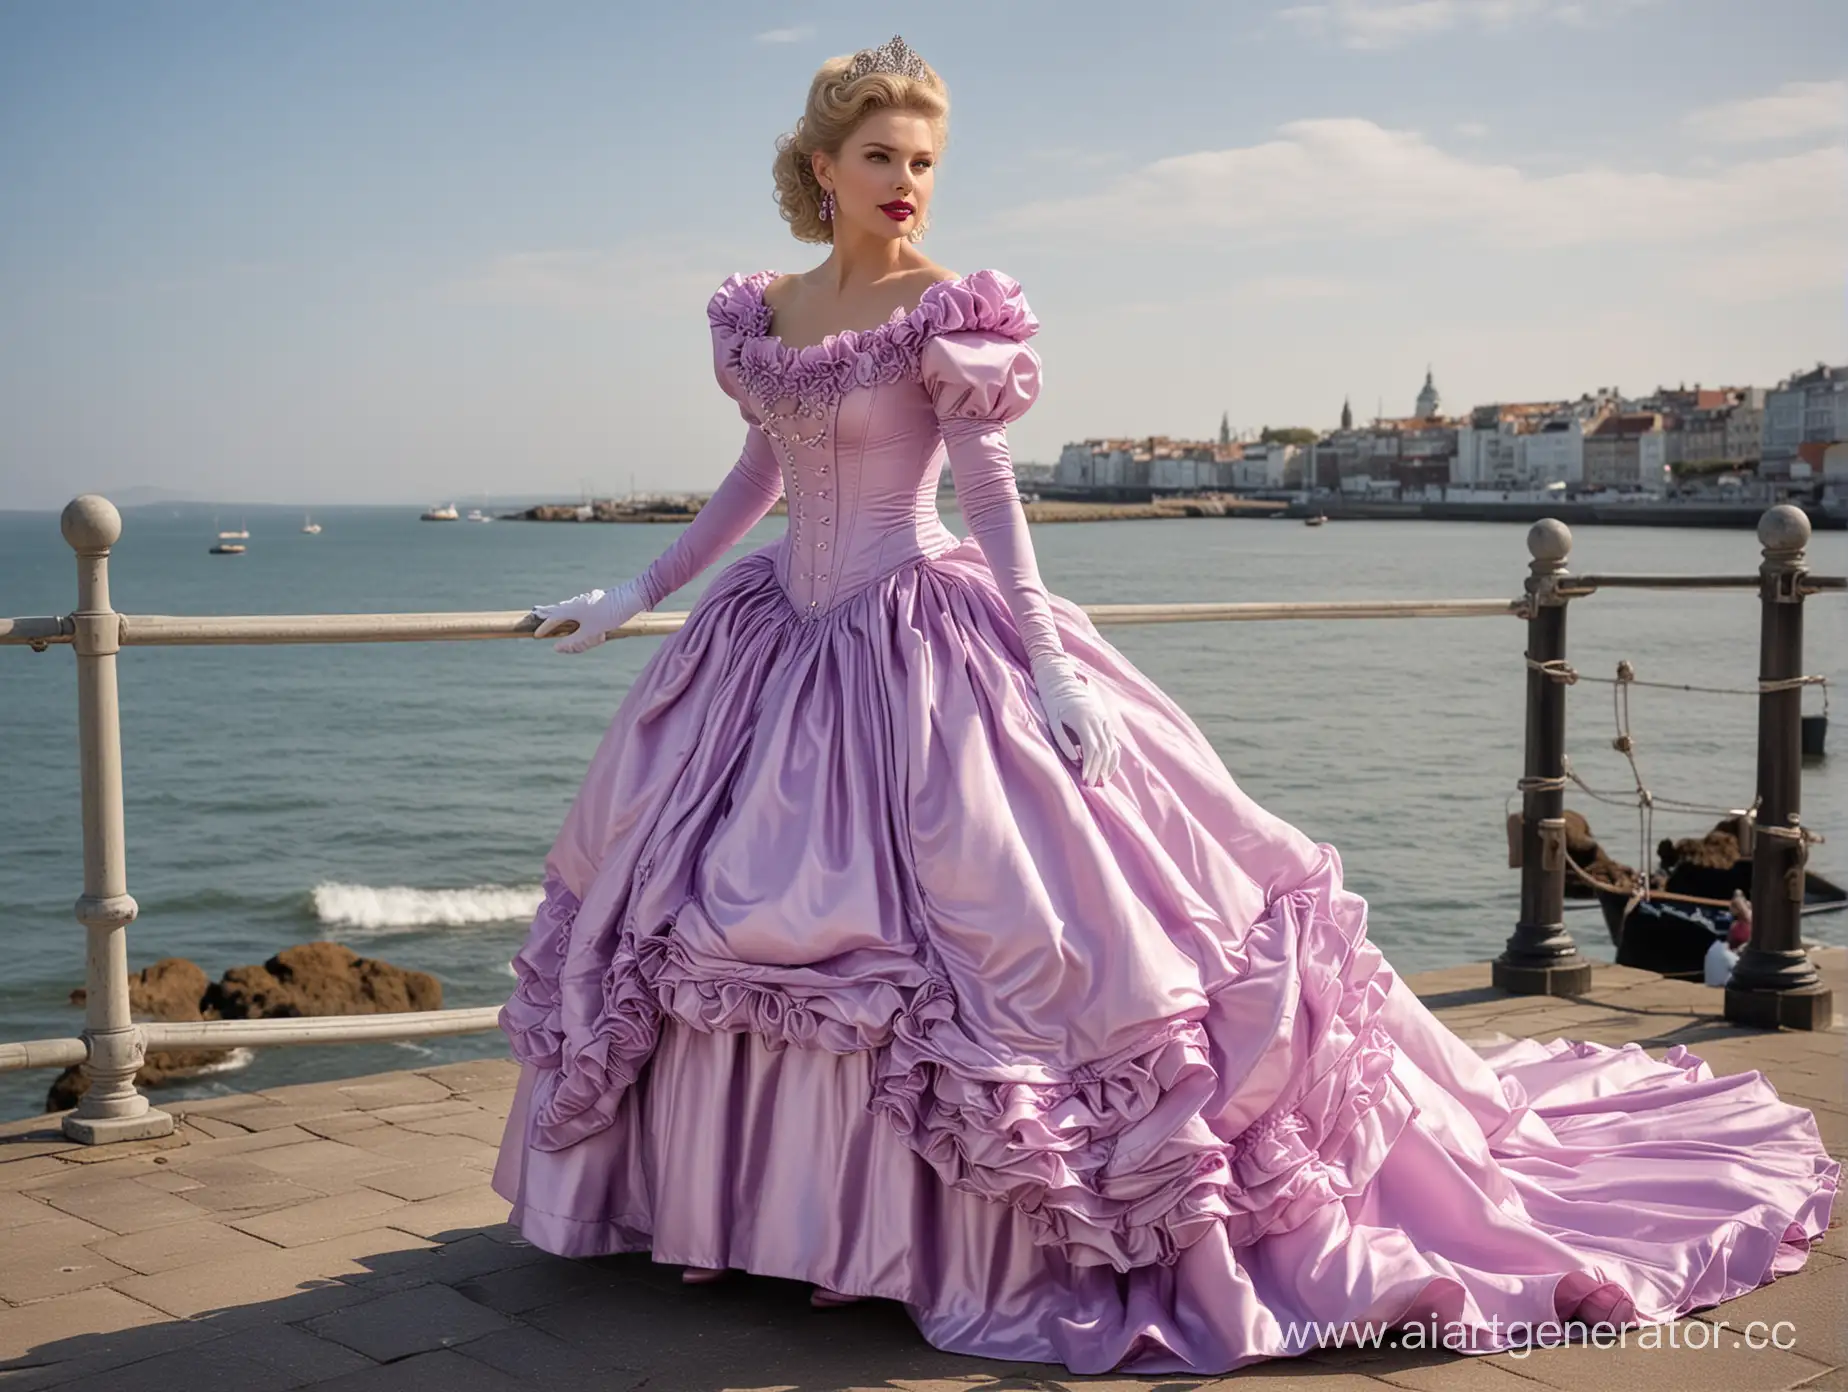 Regal-Queen-in-Luxurious-Violet-Dress-by-the-Sunny-Seaside